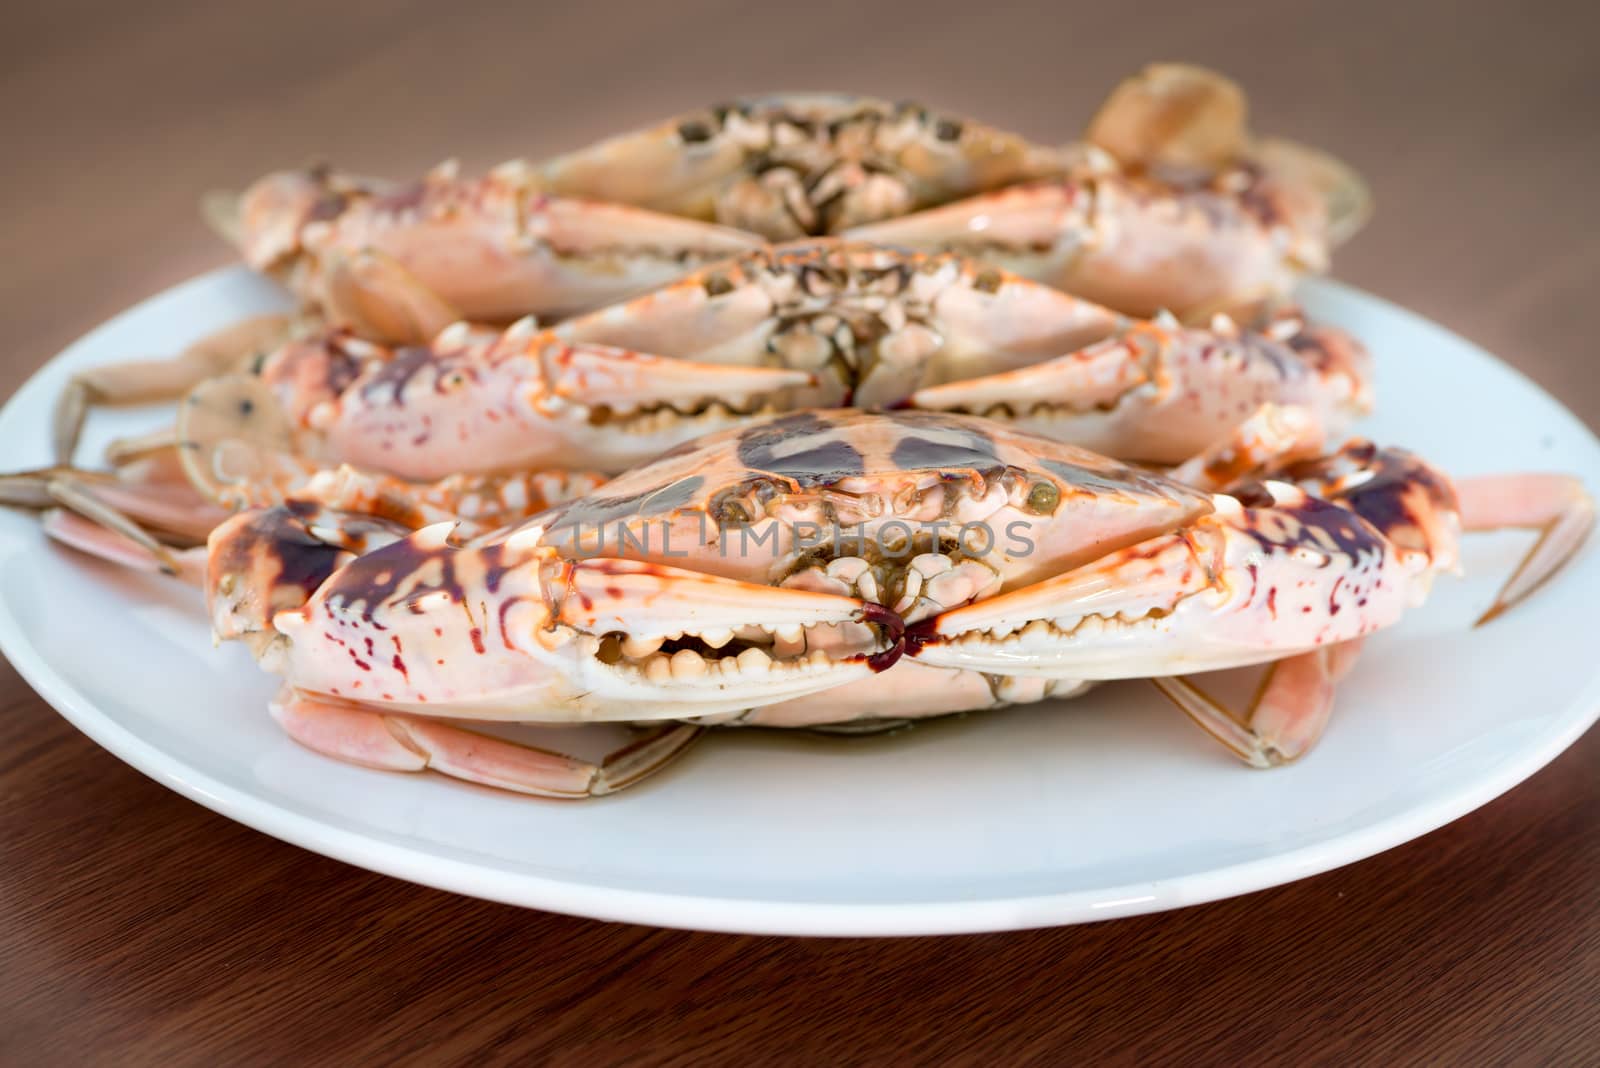 Big fresh crabs on white plate